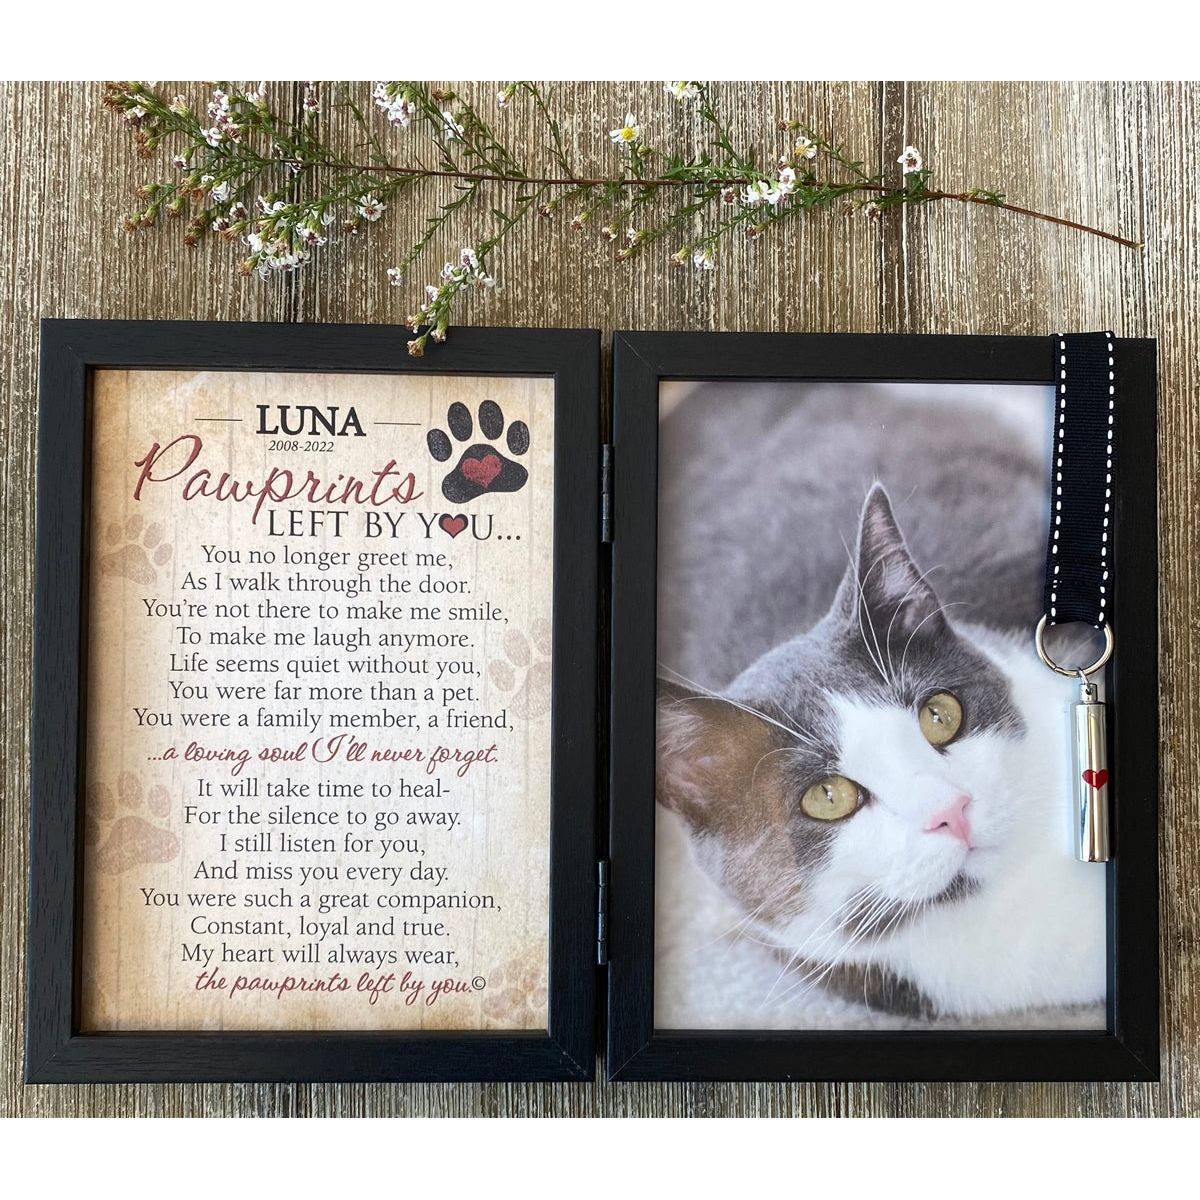 Personalized Pawprints Cat Loss Memorial Frame: Pawprints Left by You with Vial